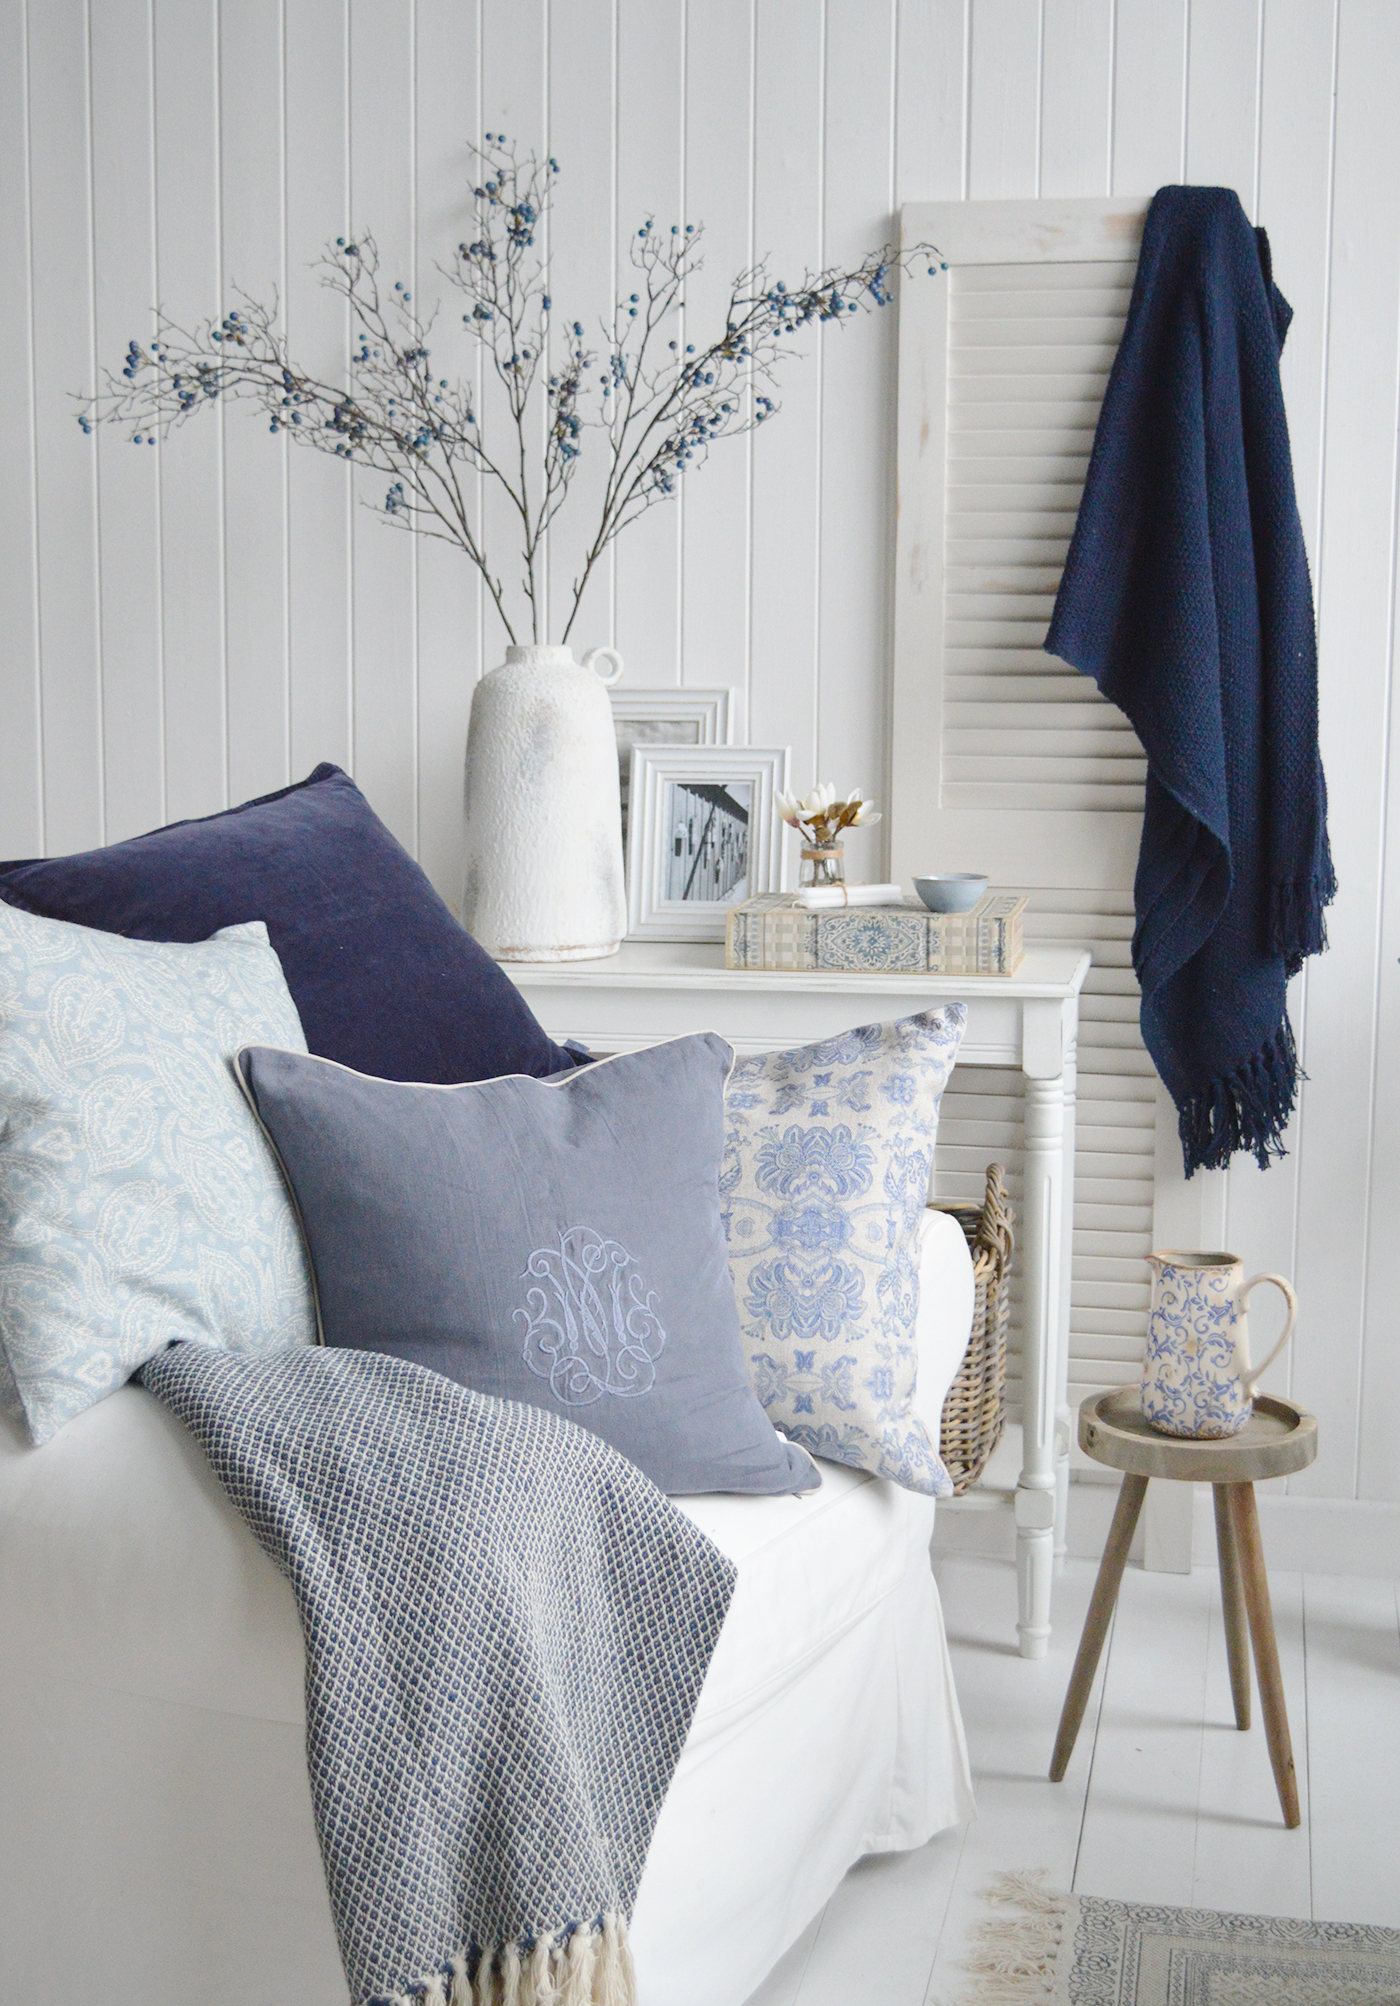 Blue and white living room decorating ideas. White furniture with blue cushions, throws and accessories for coastal, country and modern farmhouse homes and interiors